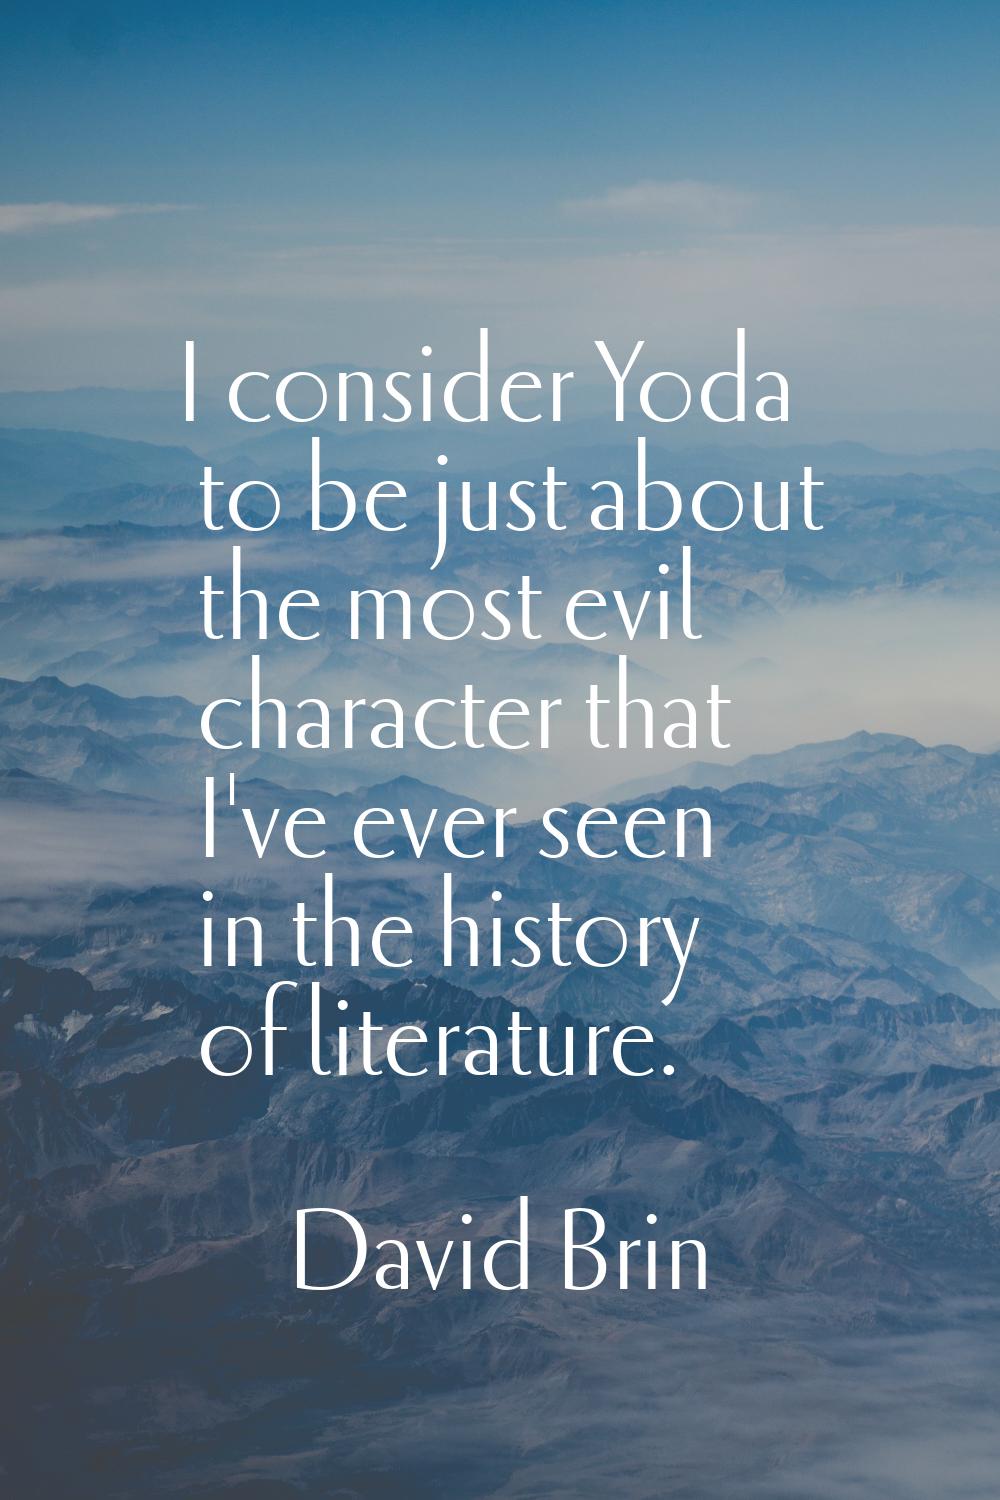 I consider Yoda to be just about the most evil character that I've ever seen in the history of lite